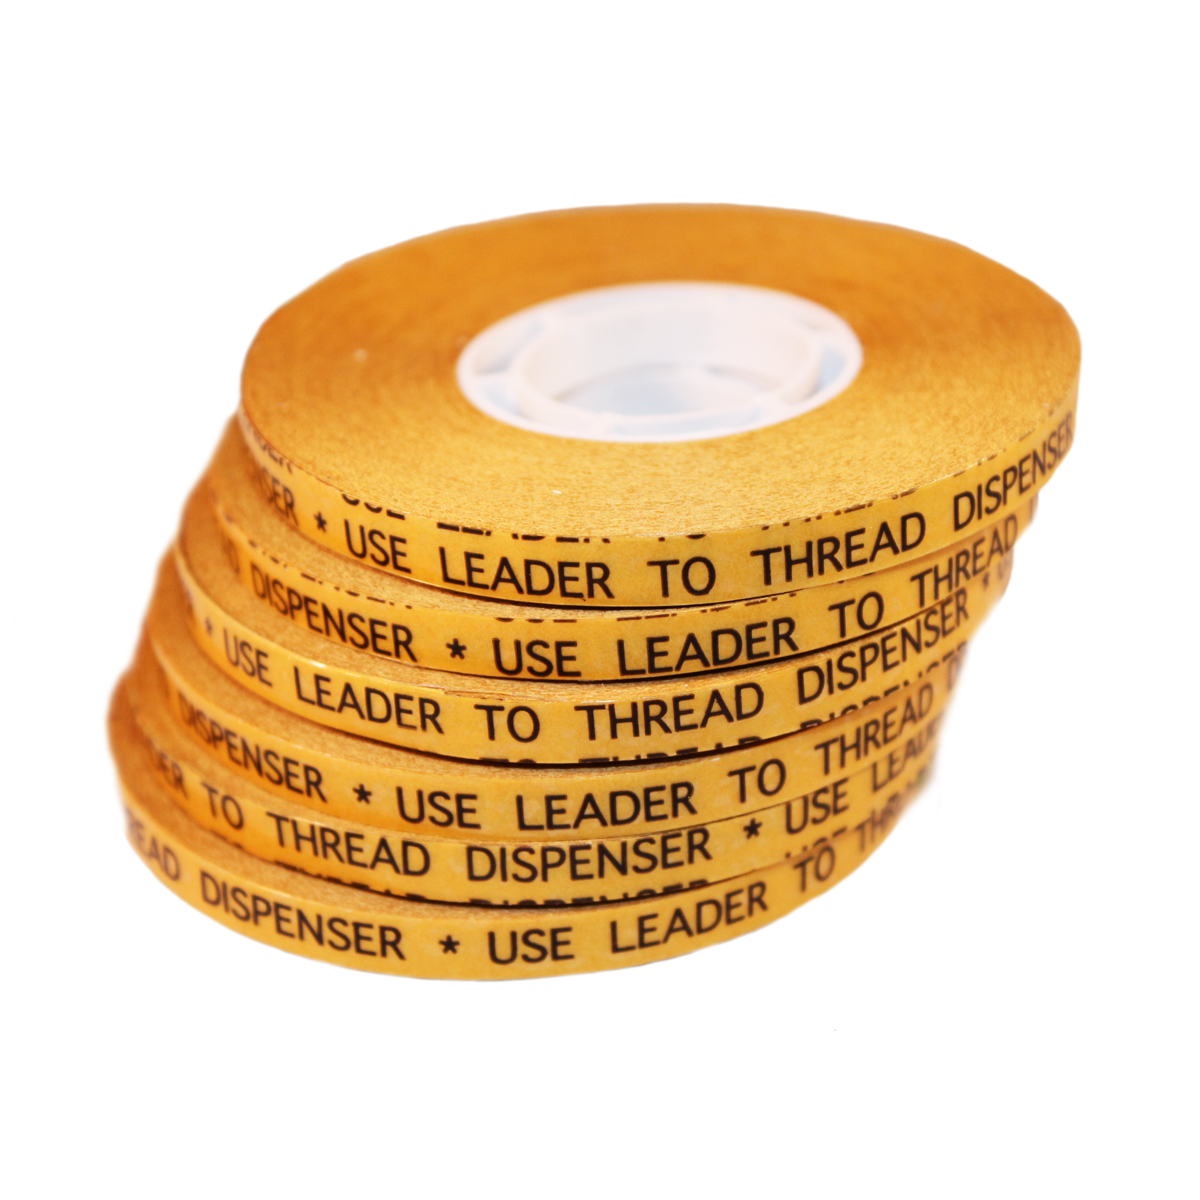 WOD RWATG20 General Purpose ATG Tape Set of 6 Rolls Adhesive Transfer Tape Glider Refill Rolls Clear Adhesive on Gold Liner 1/2 inch x 36 yds. Acid Free 